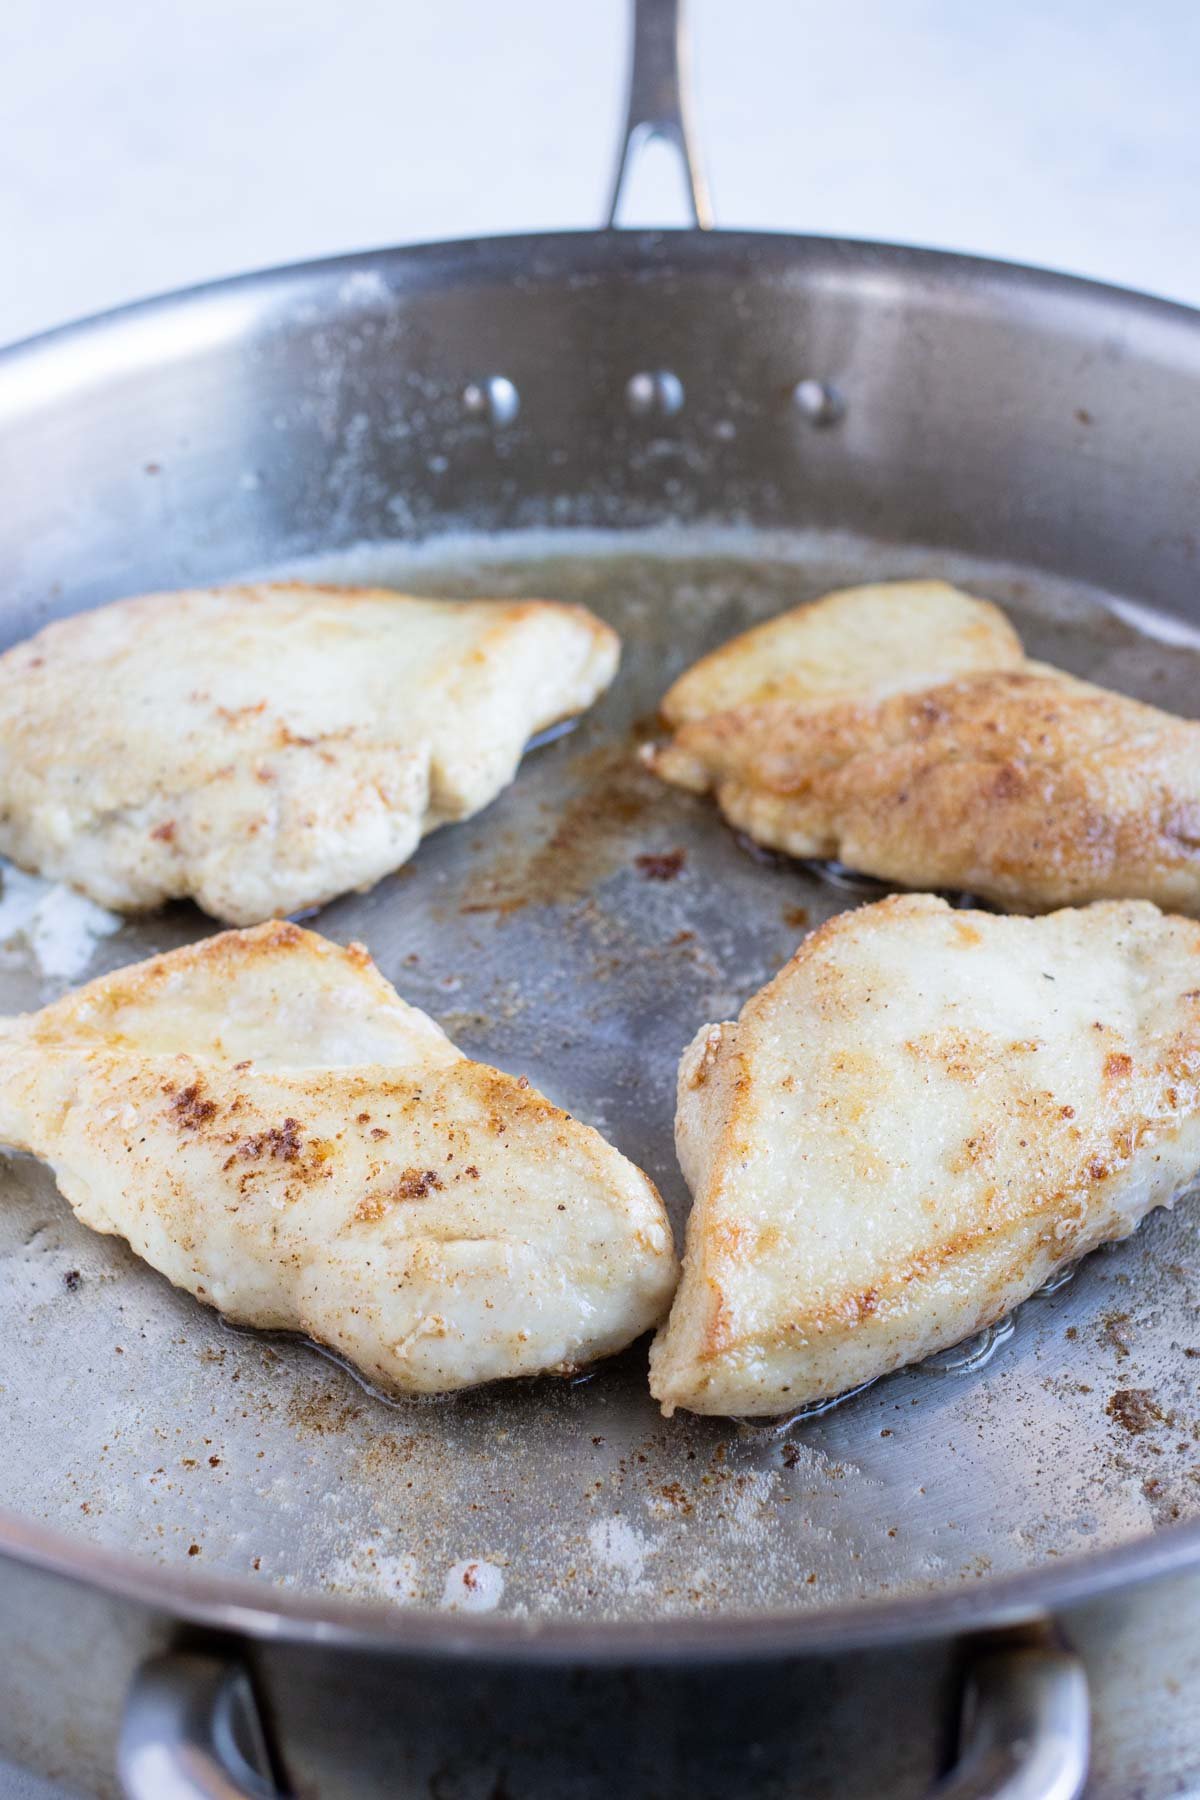 Coated chicken is cooked on the stove until crispy.